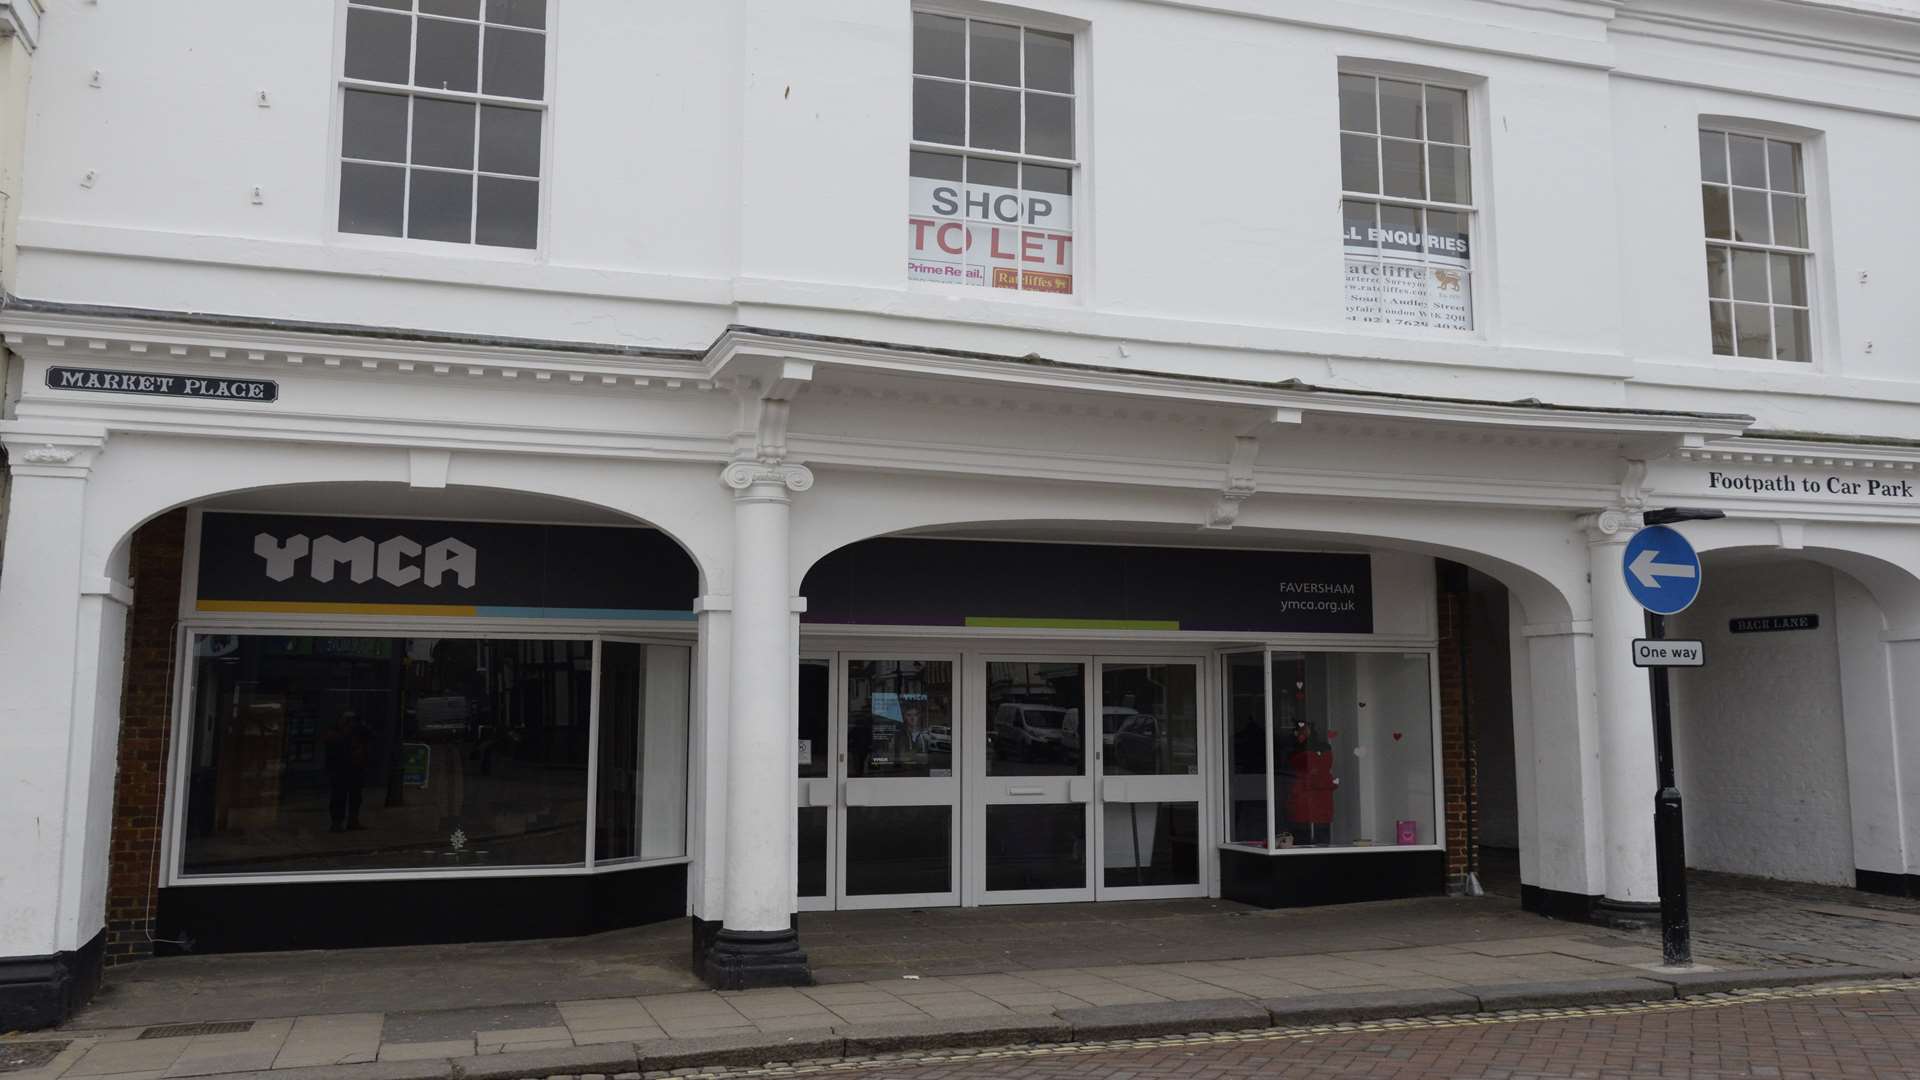 12 Market Place which has been purchased for use as council offices and an exhibition of the Magna Carta.